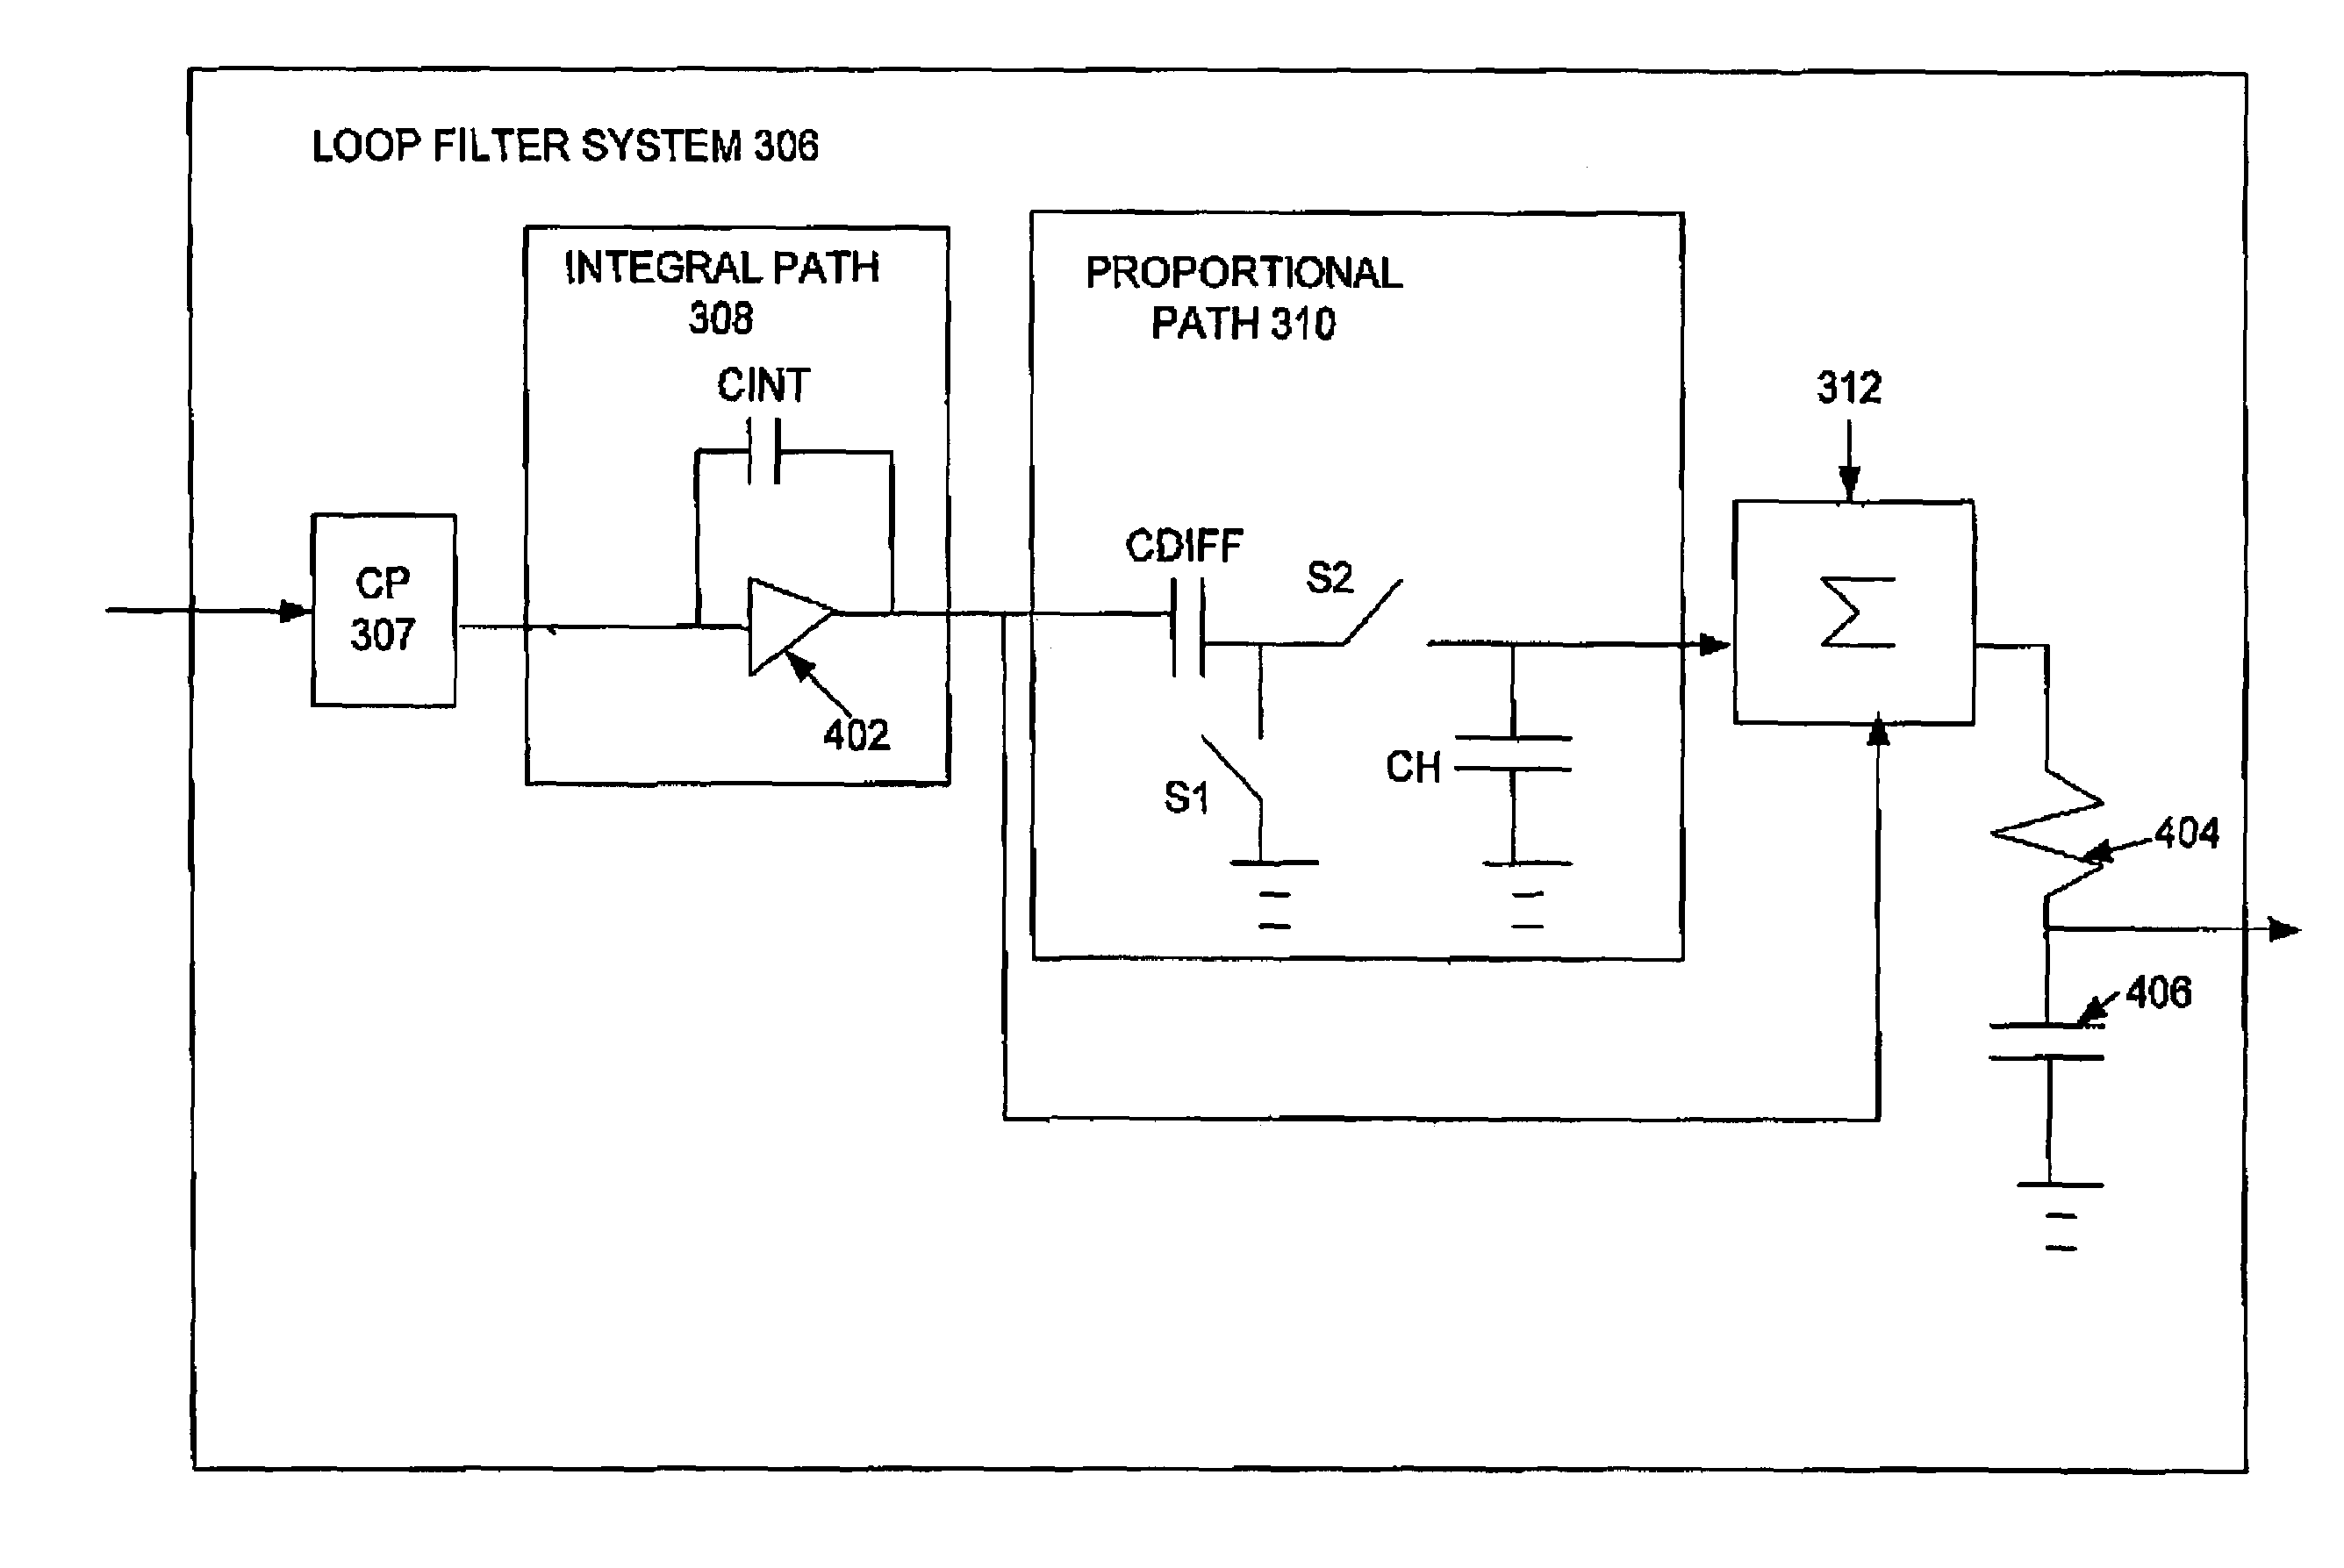 Low-noise loop filter for a phase-locked loop system